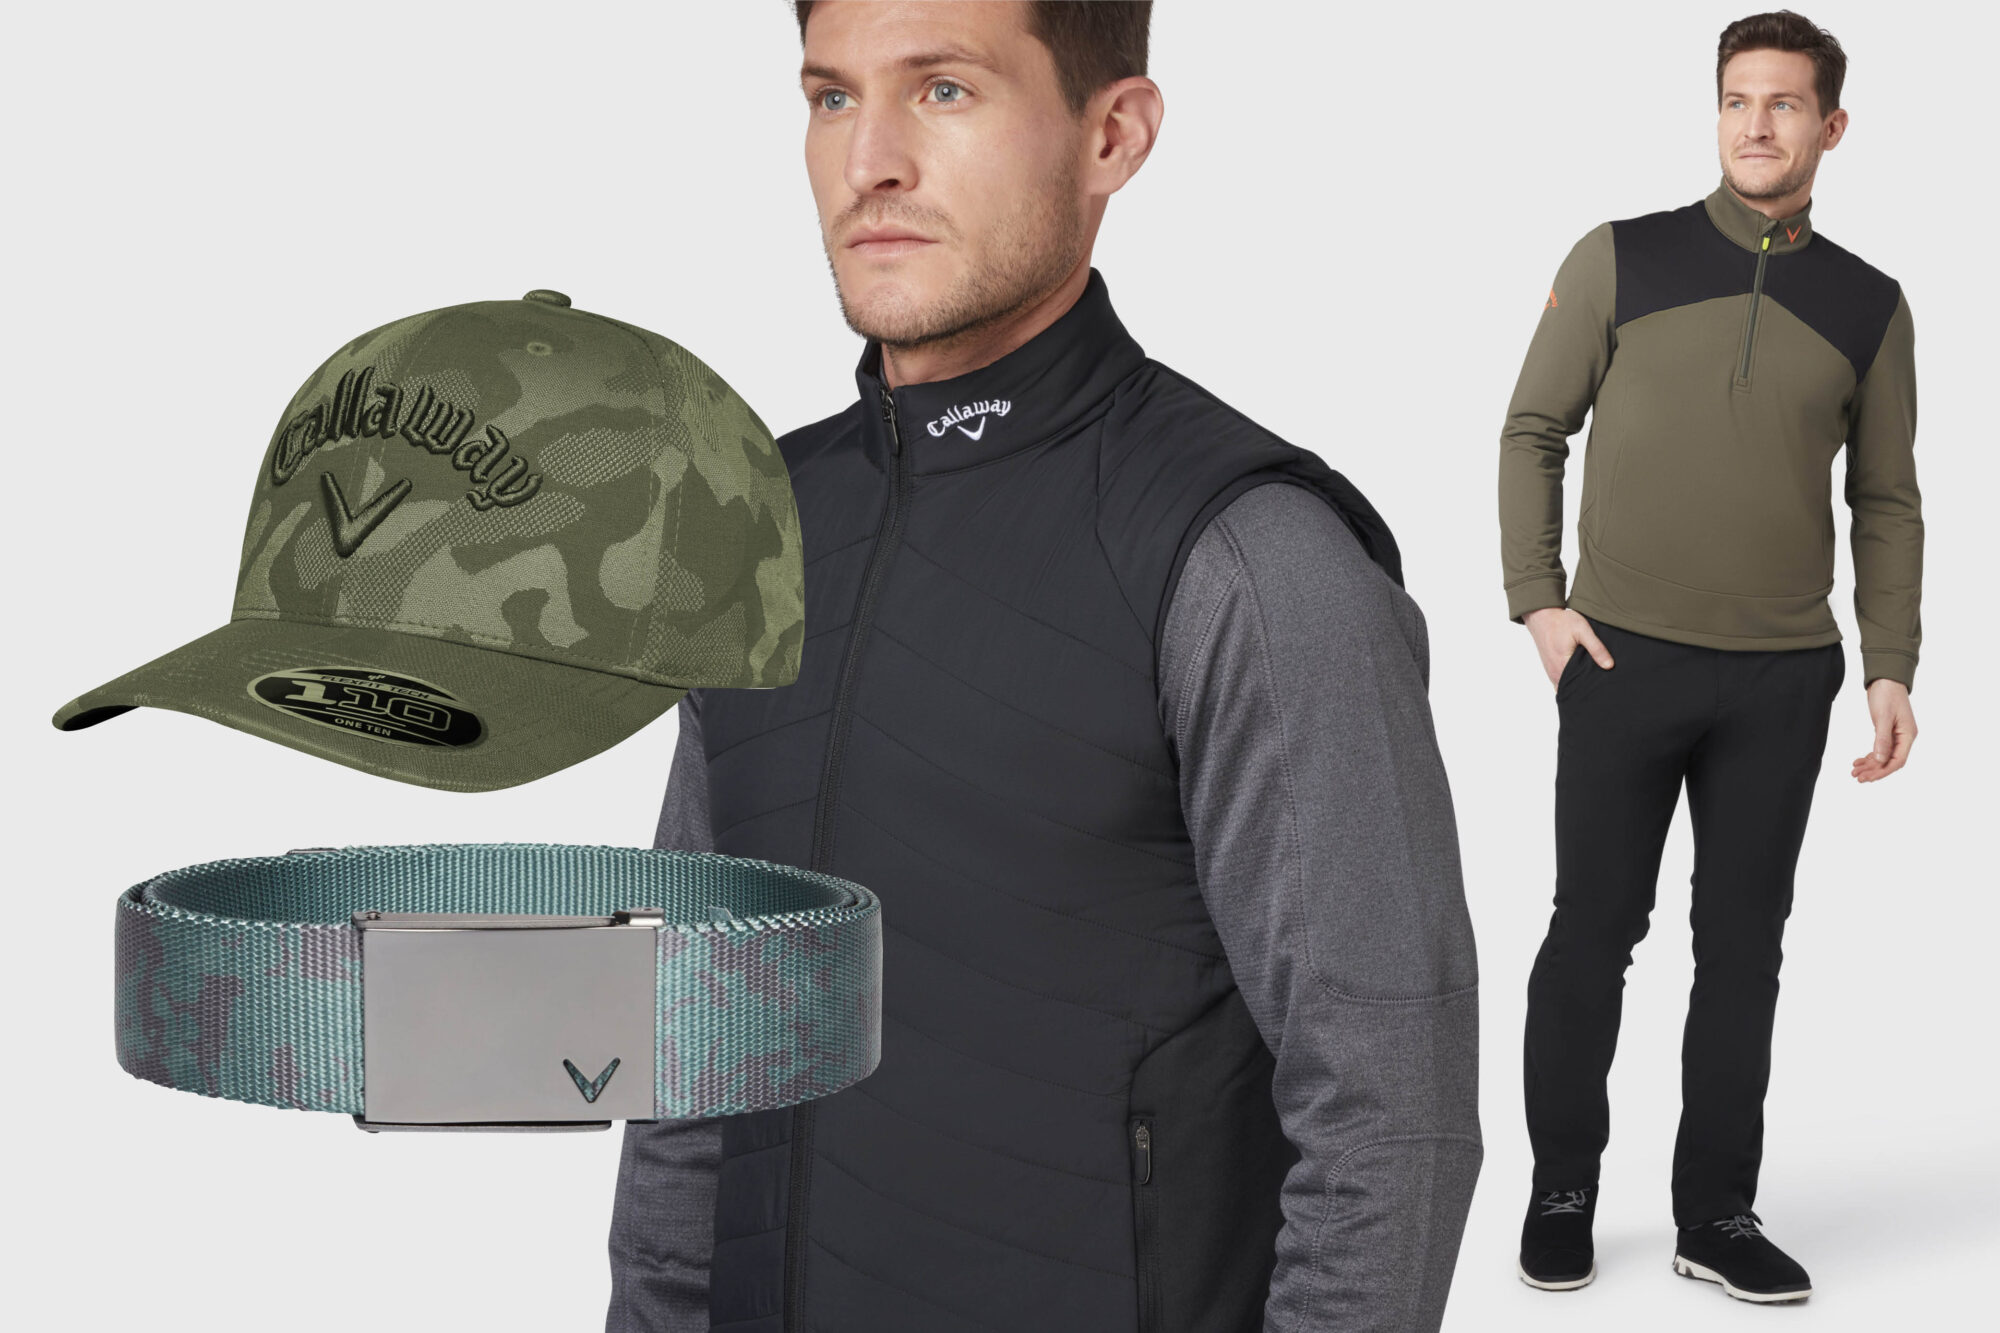 WIN! An autumn 2022 Callaway Apparel outfit worth £300